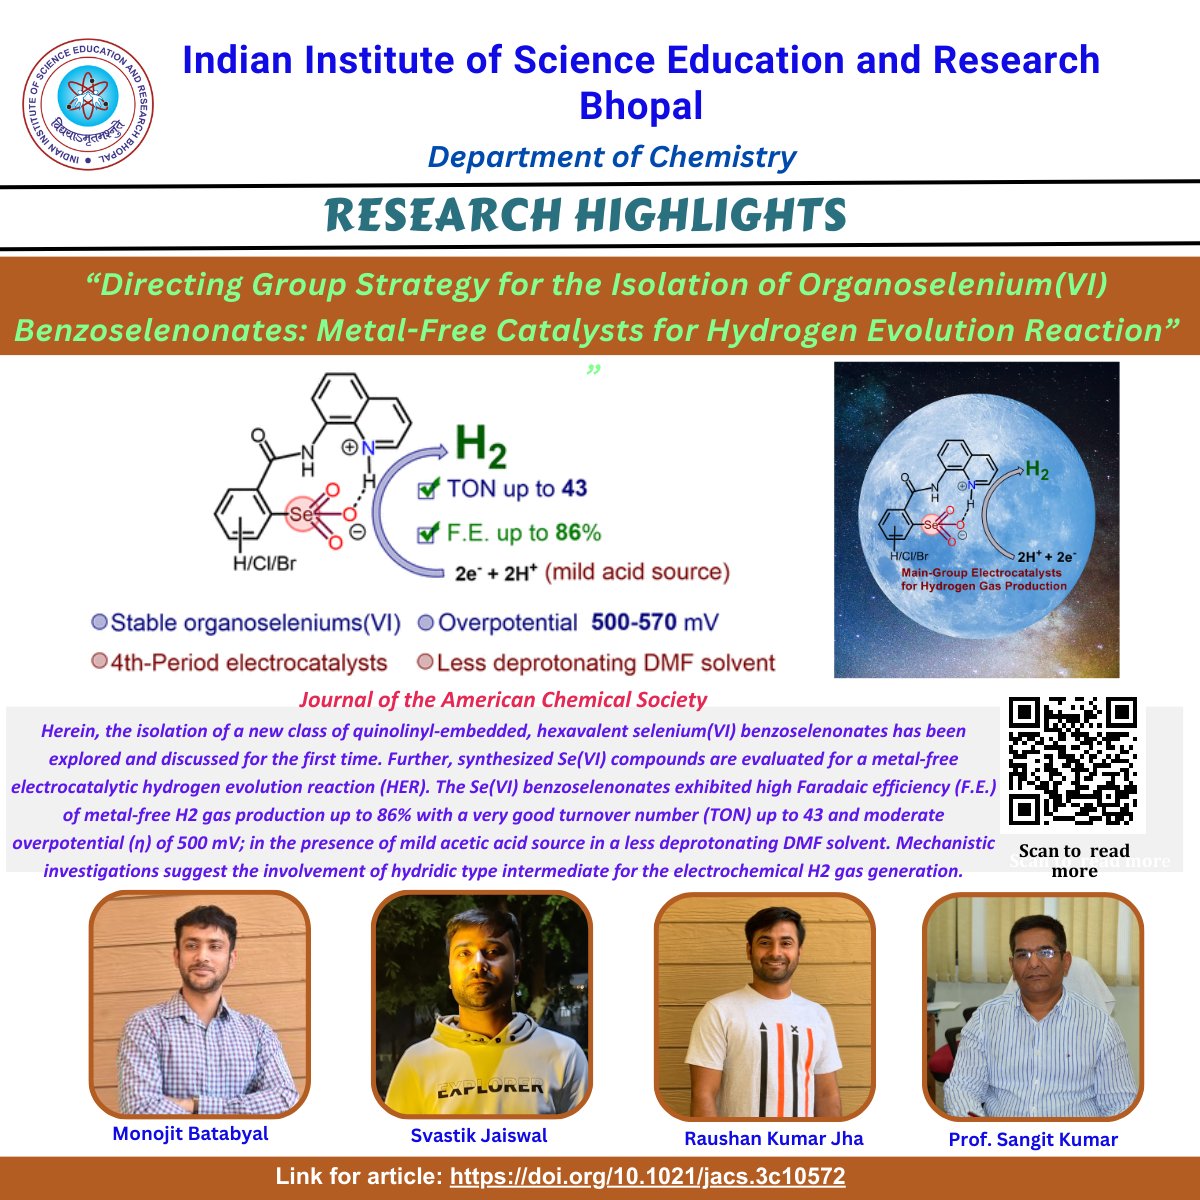 Research article 'Directing Group Strategy for the Isolation of Organoselenium(VI) Benzoselenonates: Metal-Free Catalysts for Hydrogen Evolution Reaction' published in Journal of the American Chemical Society doi.org/10.1021/jacs.3… @EduMinOfIndia @IndiaDST @serbonline